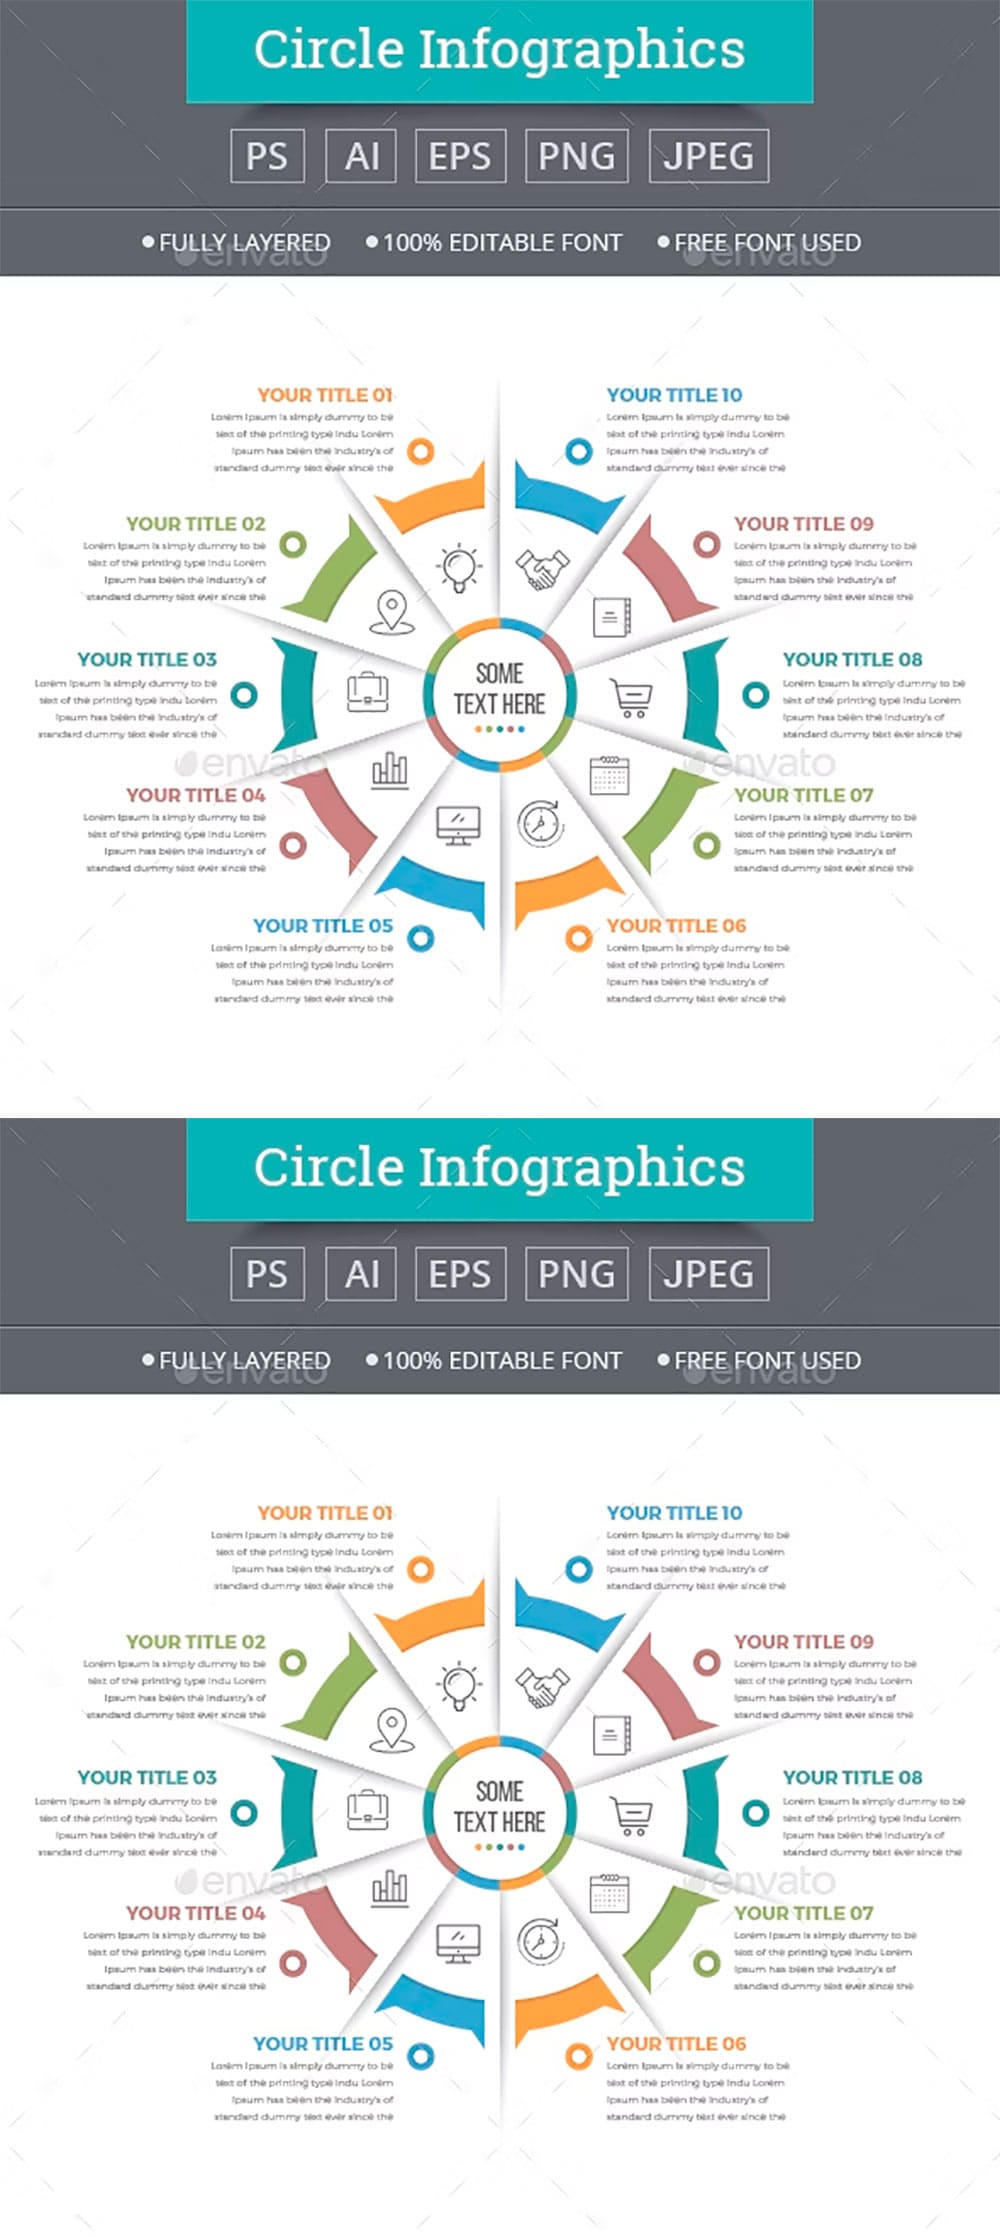 Business circle infographics with 10 steps, picture for pinterest.